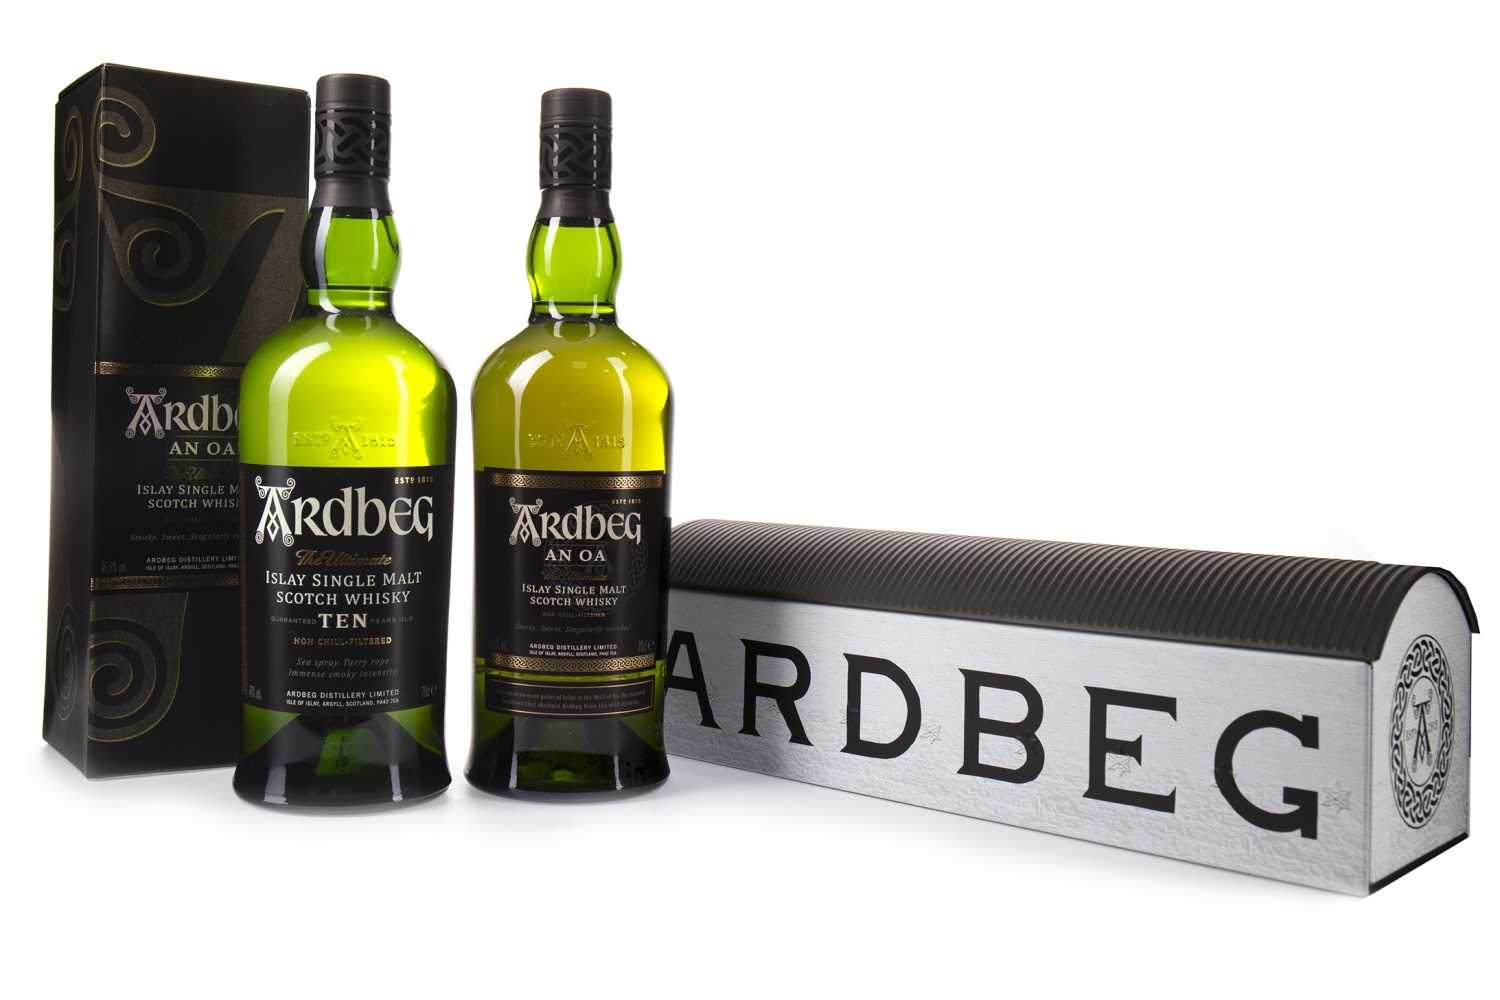 Lot 366 - ARDBEG AN OA AND 10 YEARS OLD WAREHOUSE PACKAGING